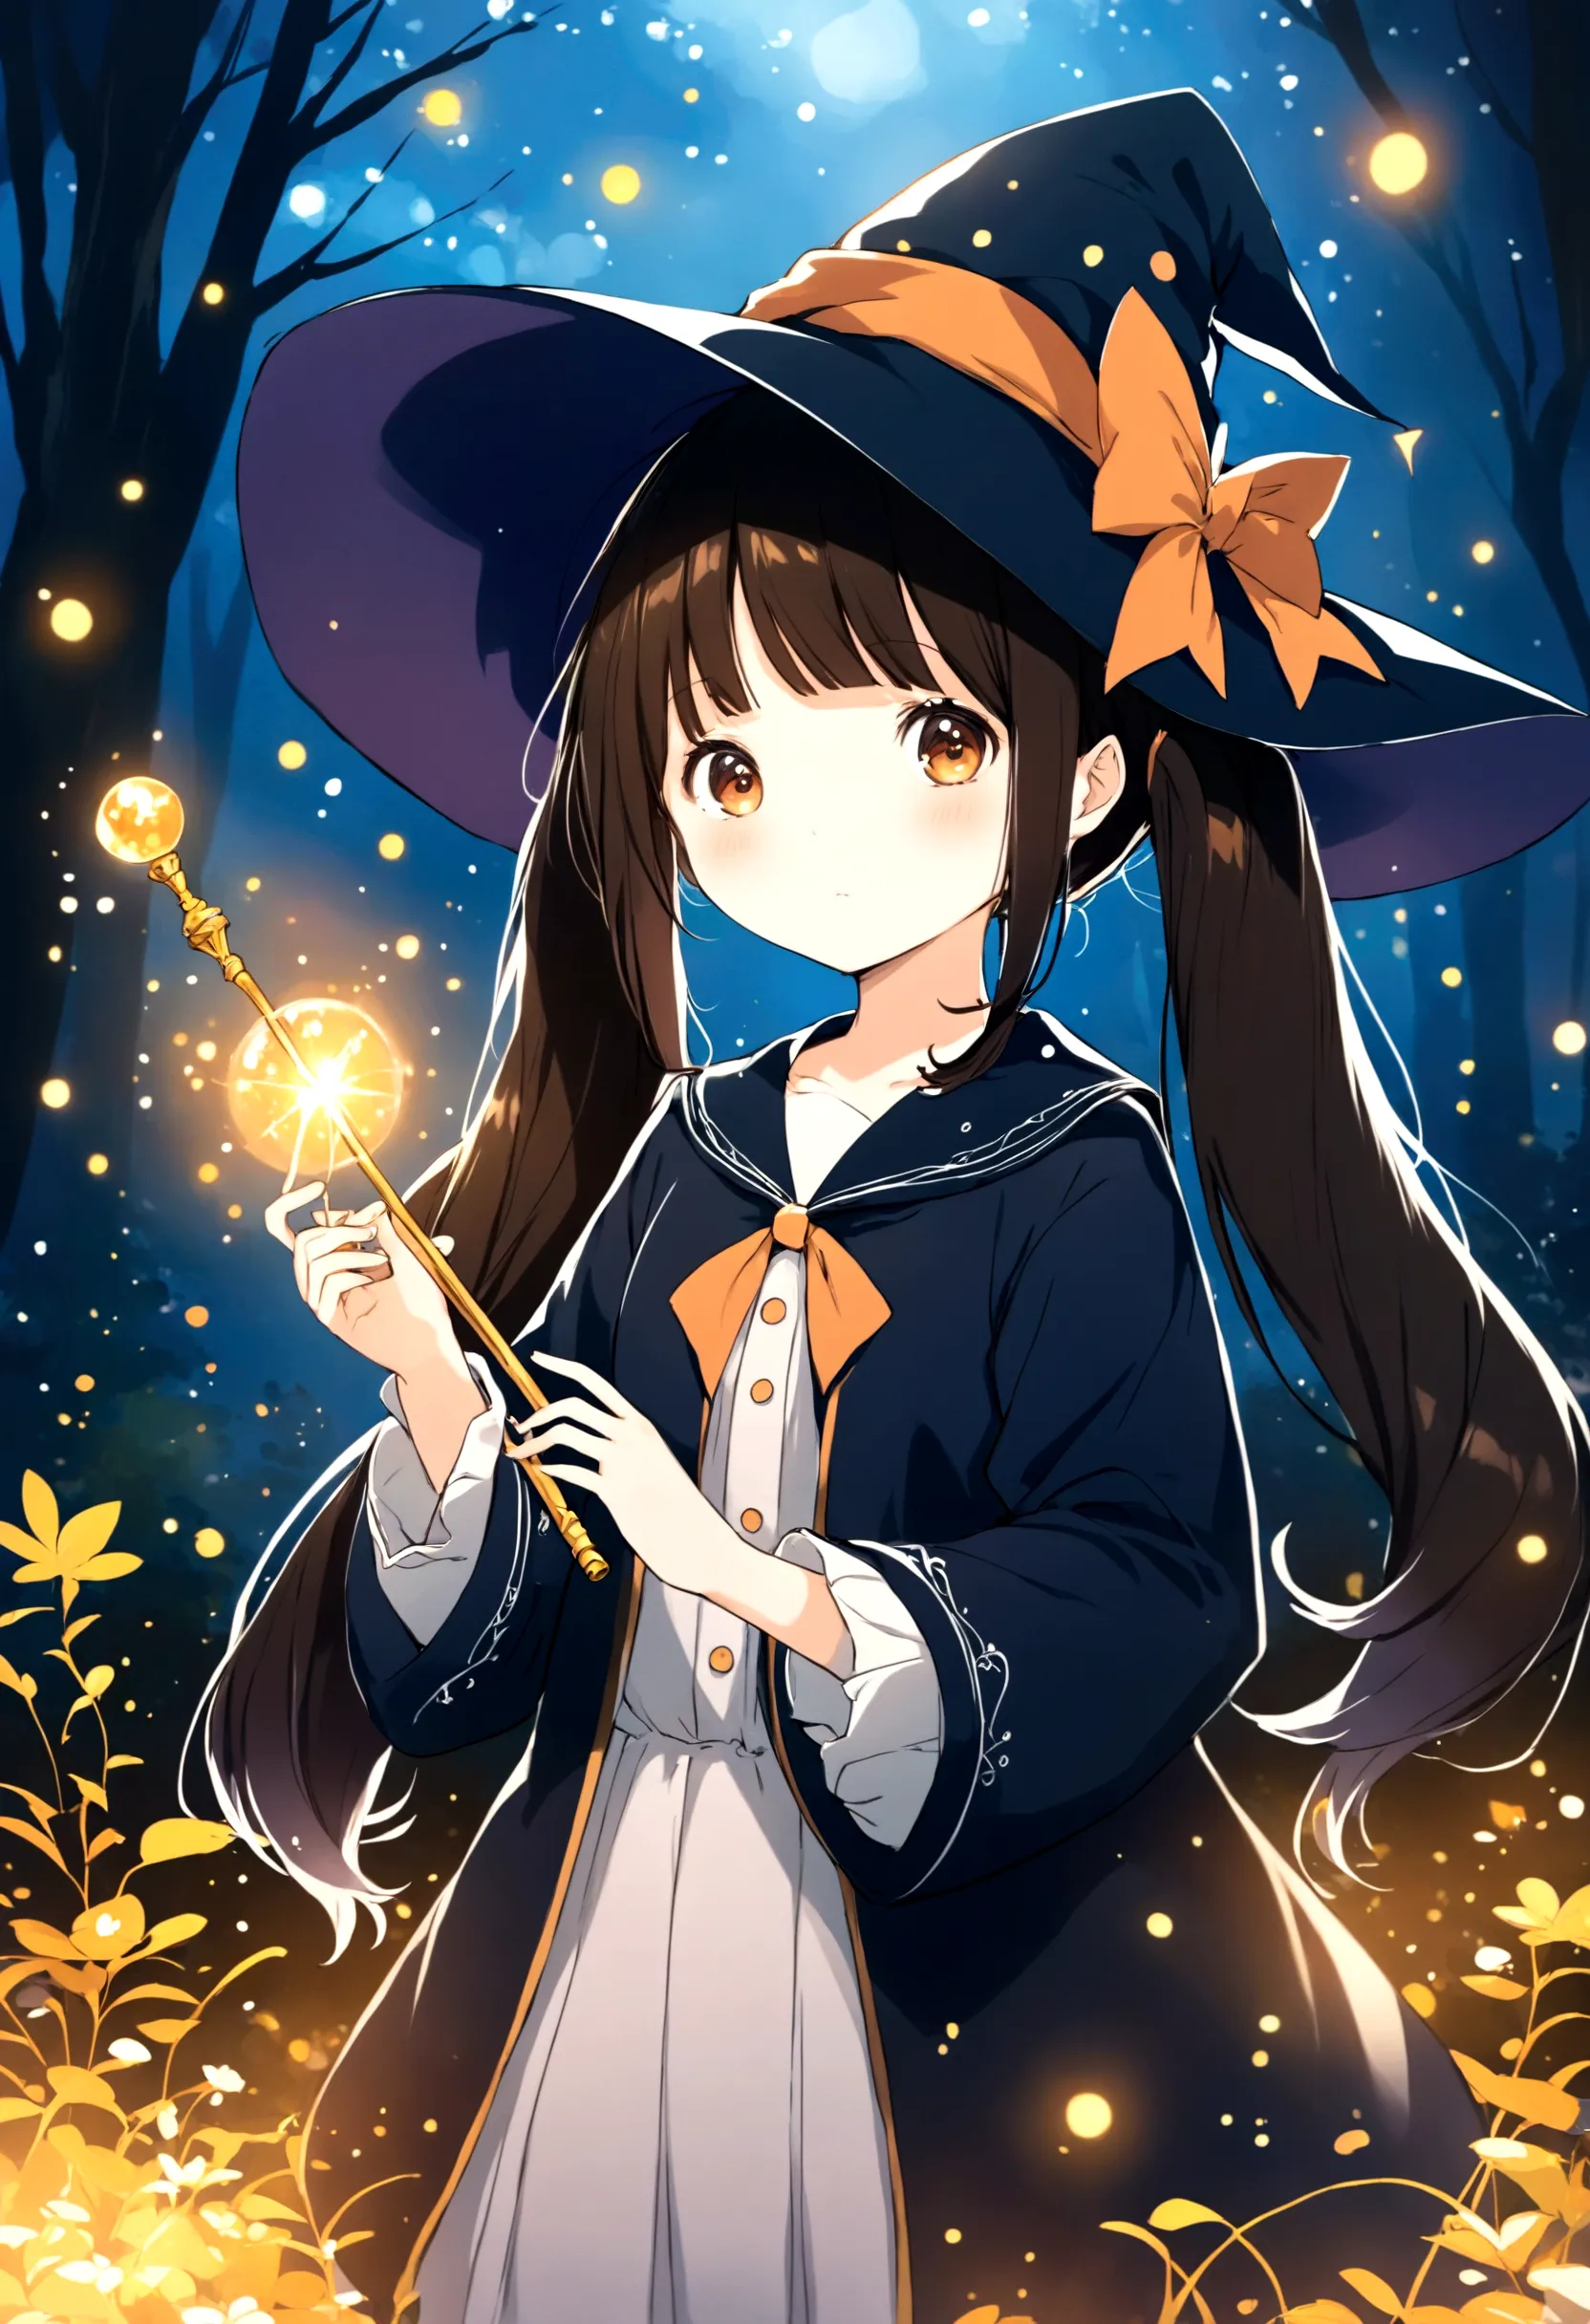 Twin Tails、, Cute anime style Hagrid, Young witches, Anime cute art style, Marisa Kirisame, Witch Girl, Anime Characters, as an ...